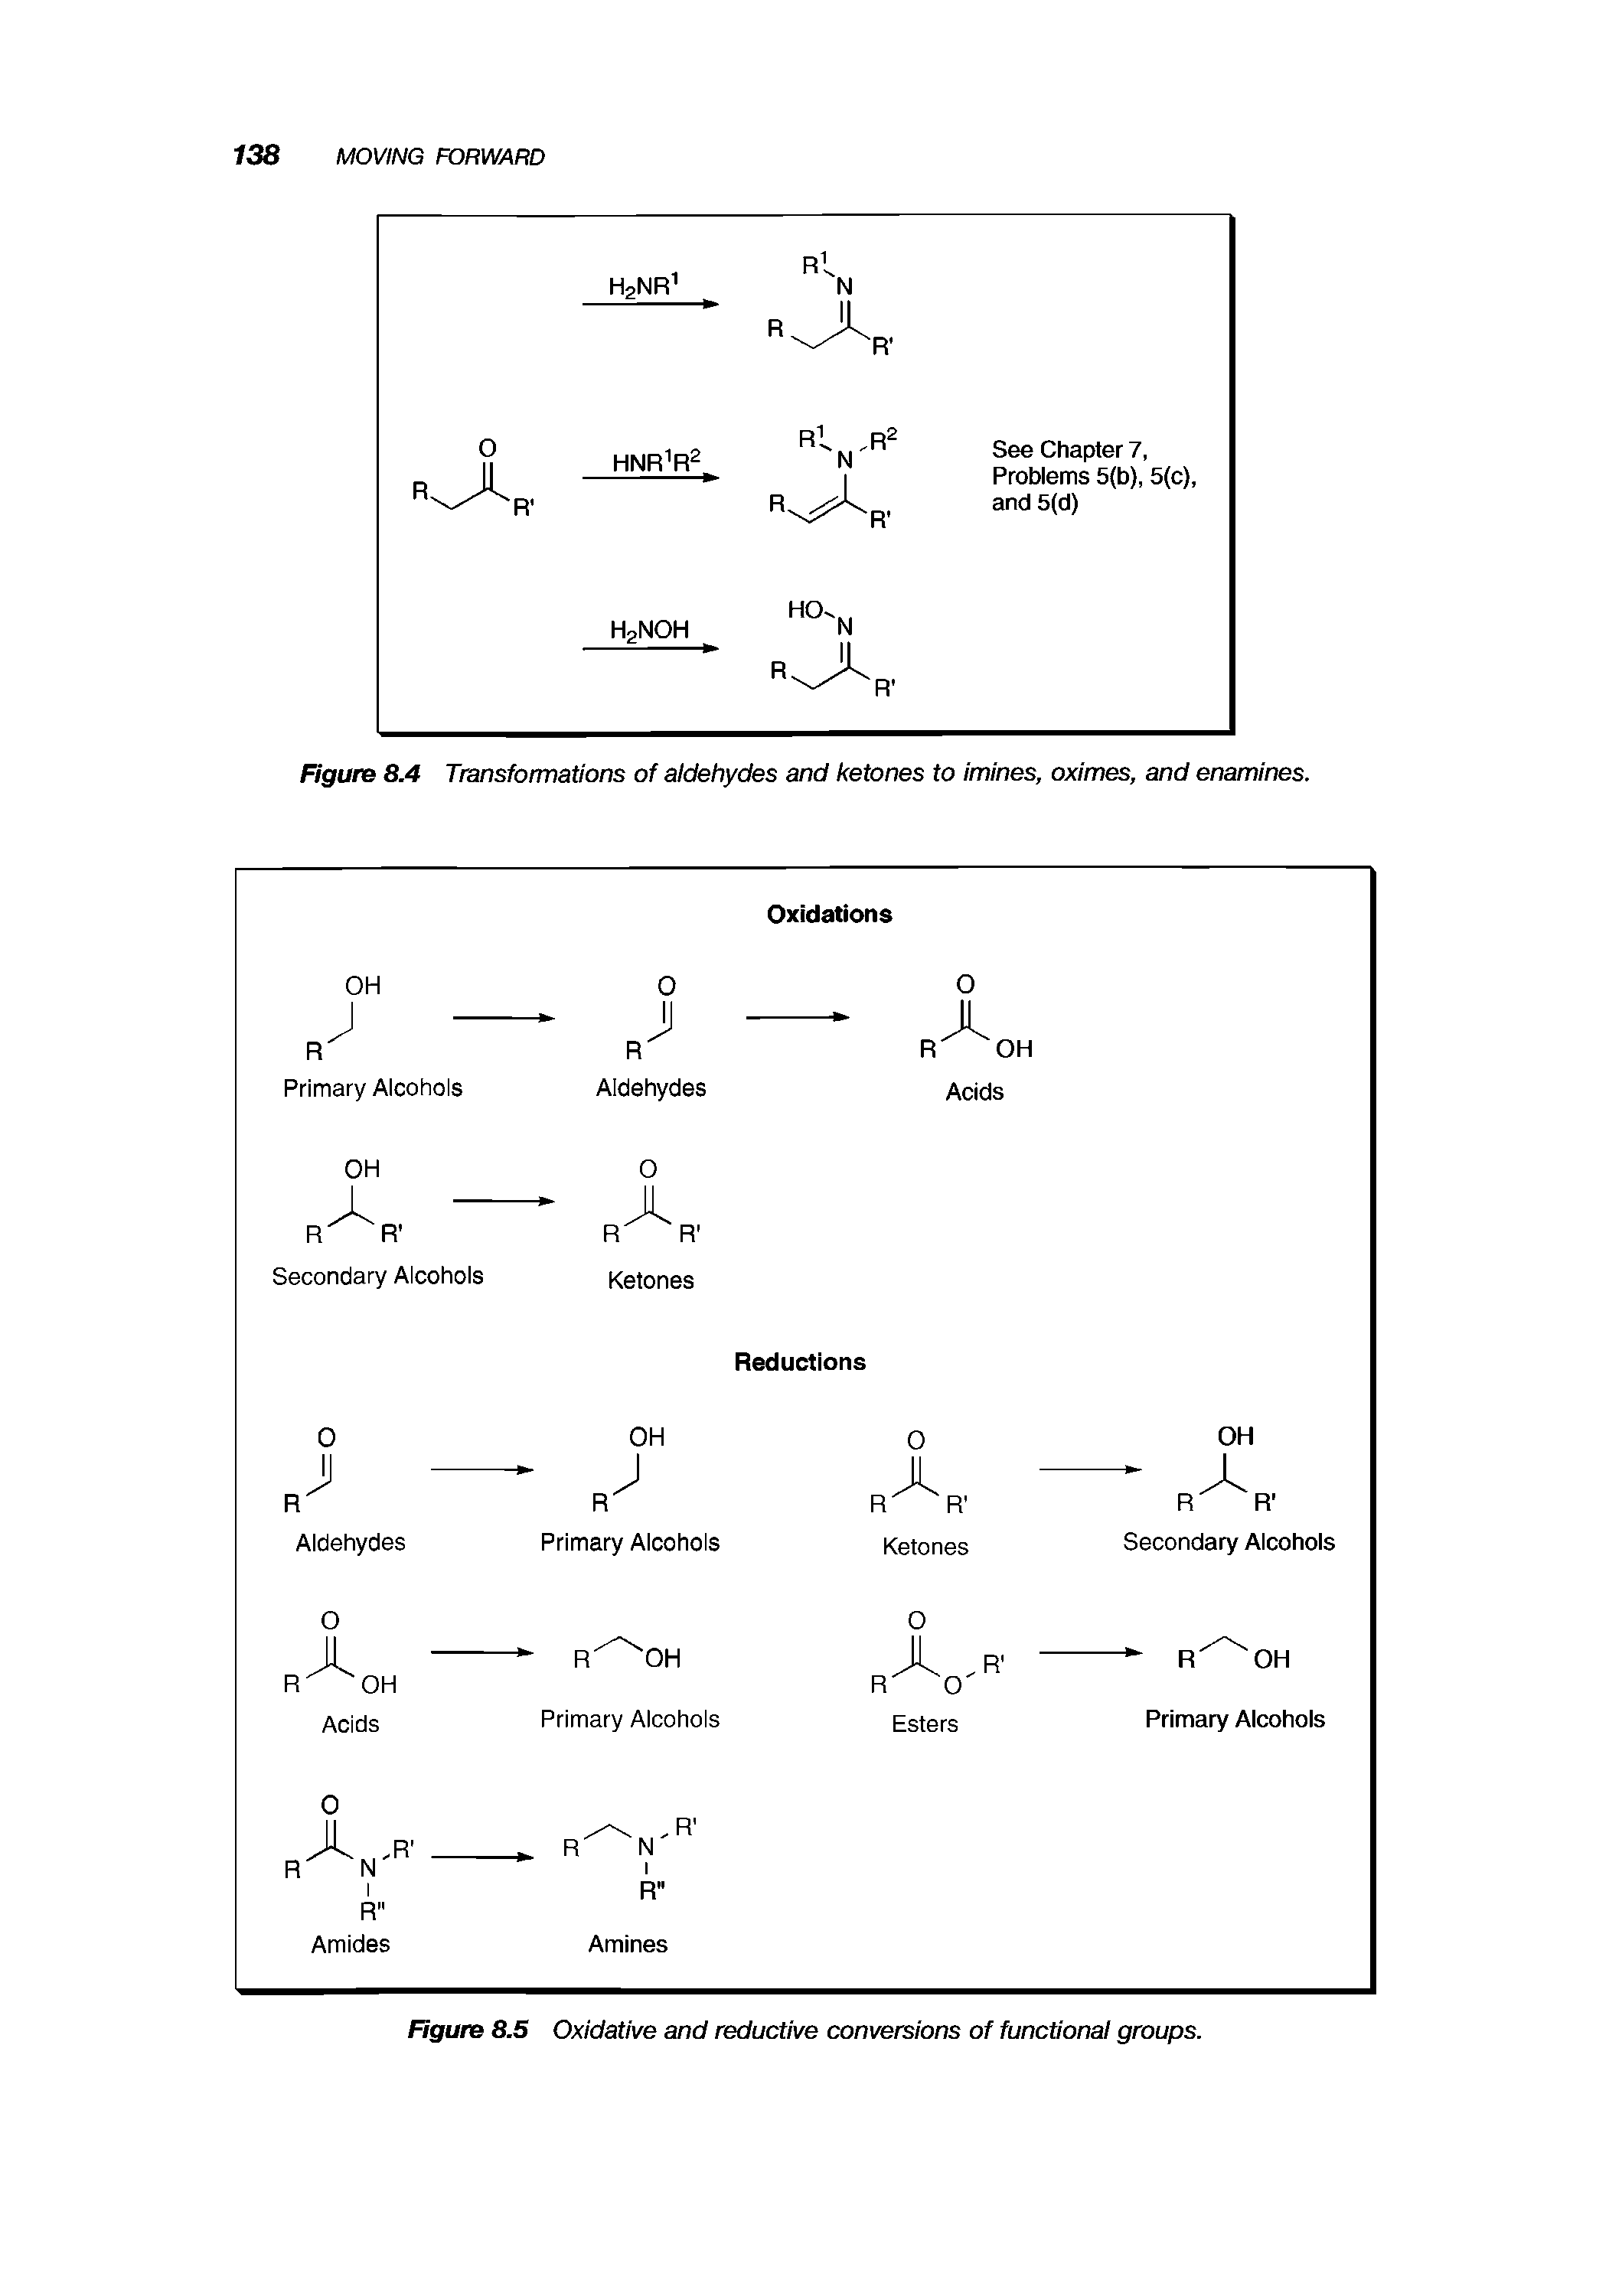 Figure 8.4 Transformations of aldehydes and ketones to imines, oximes, and enamines.